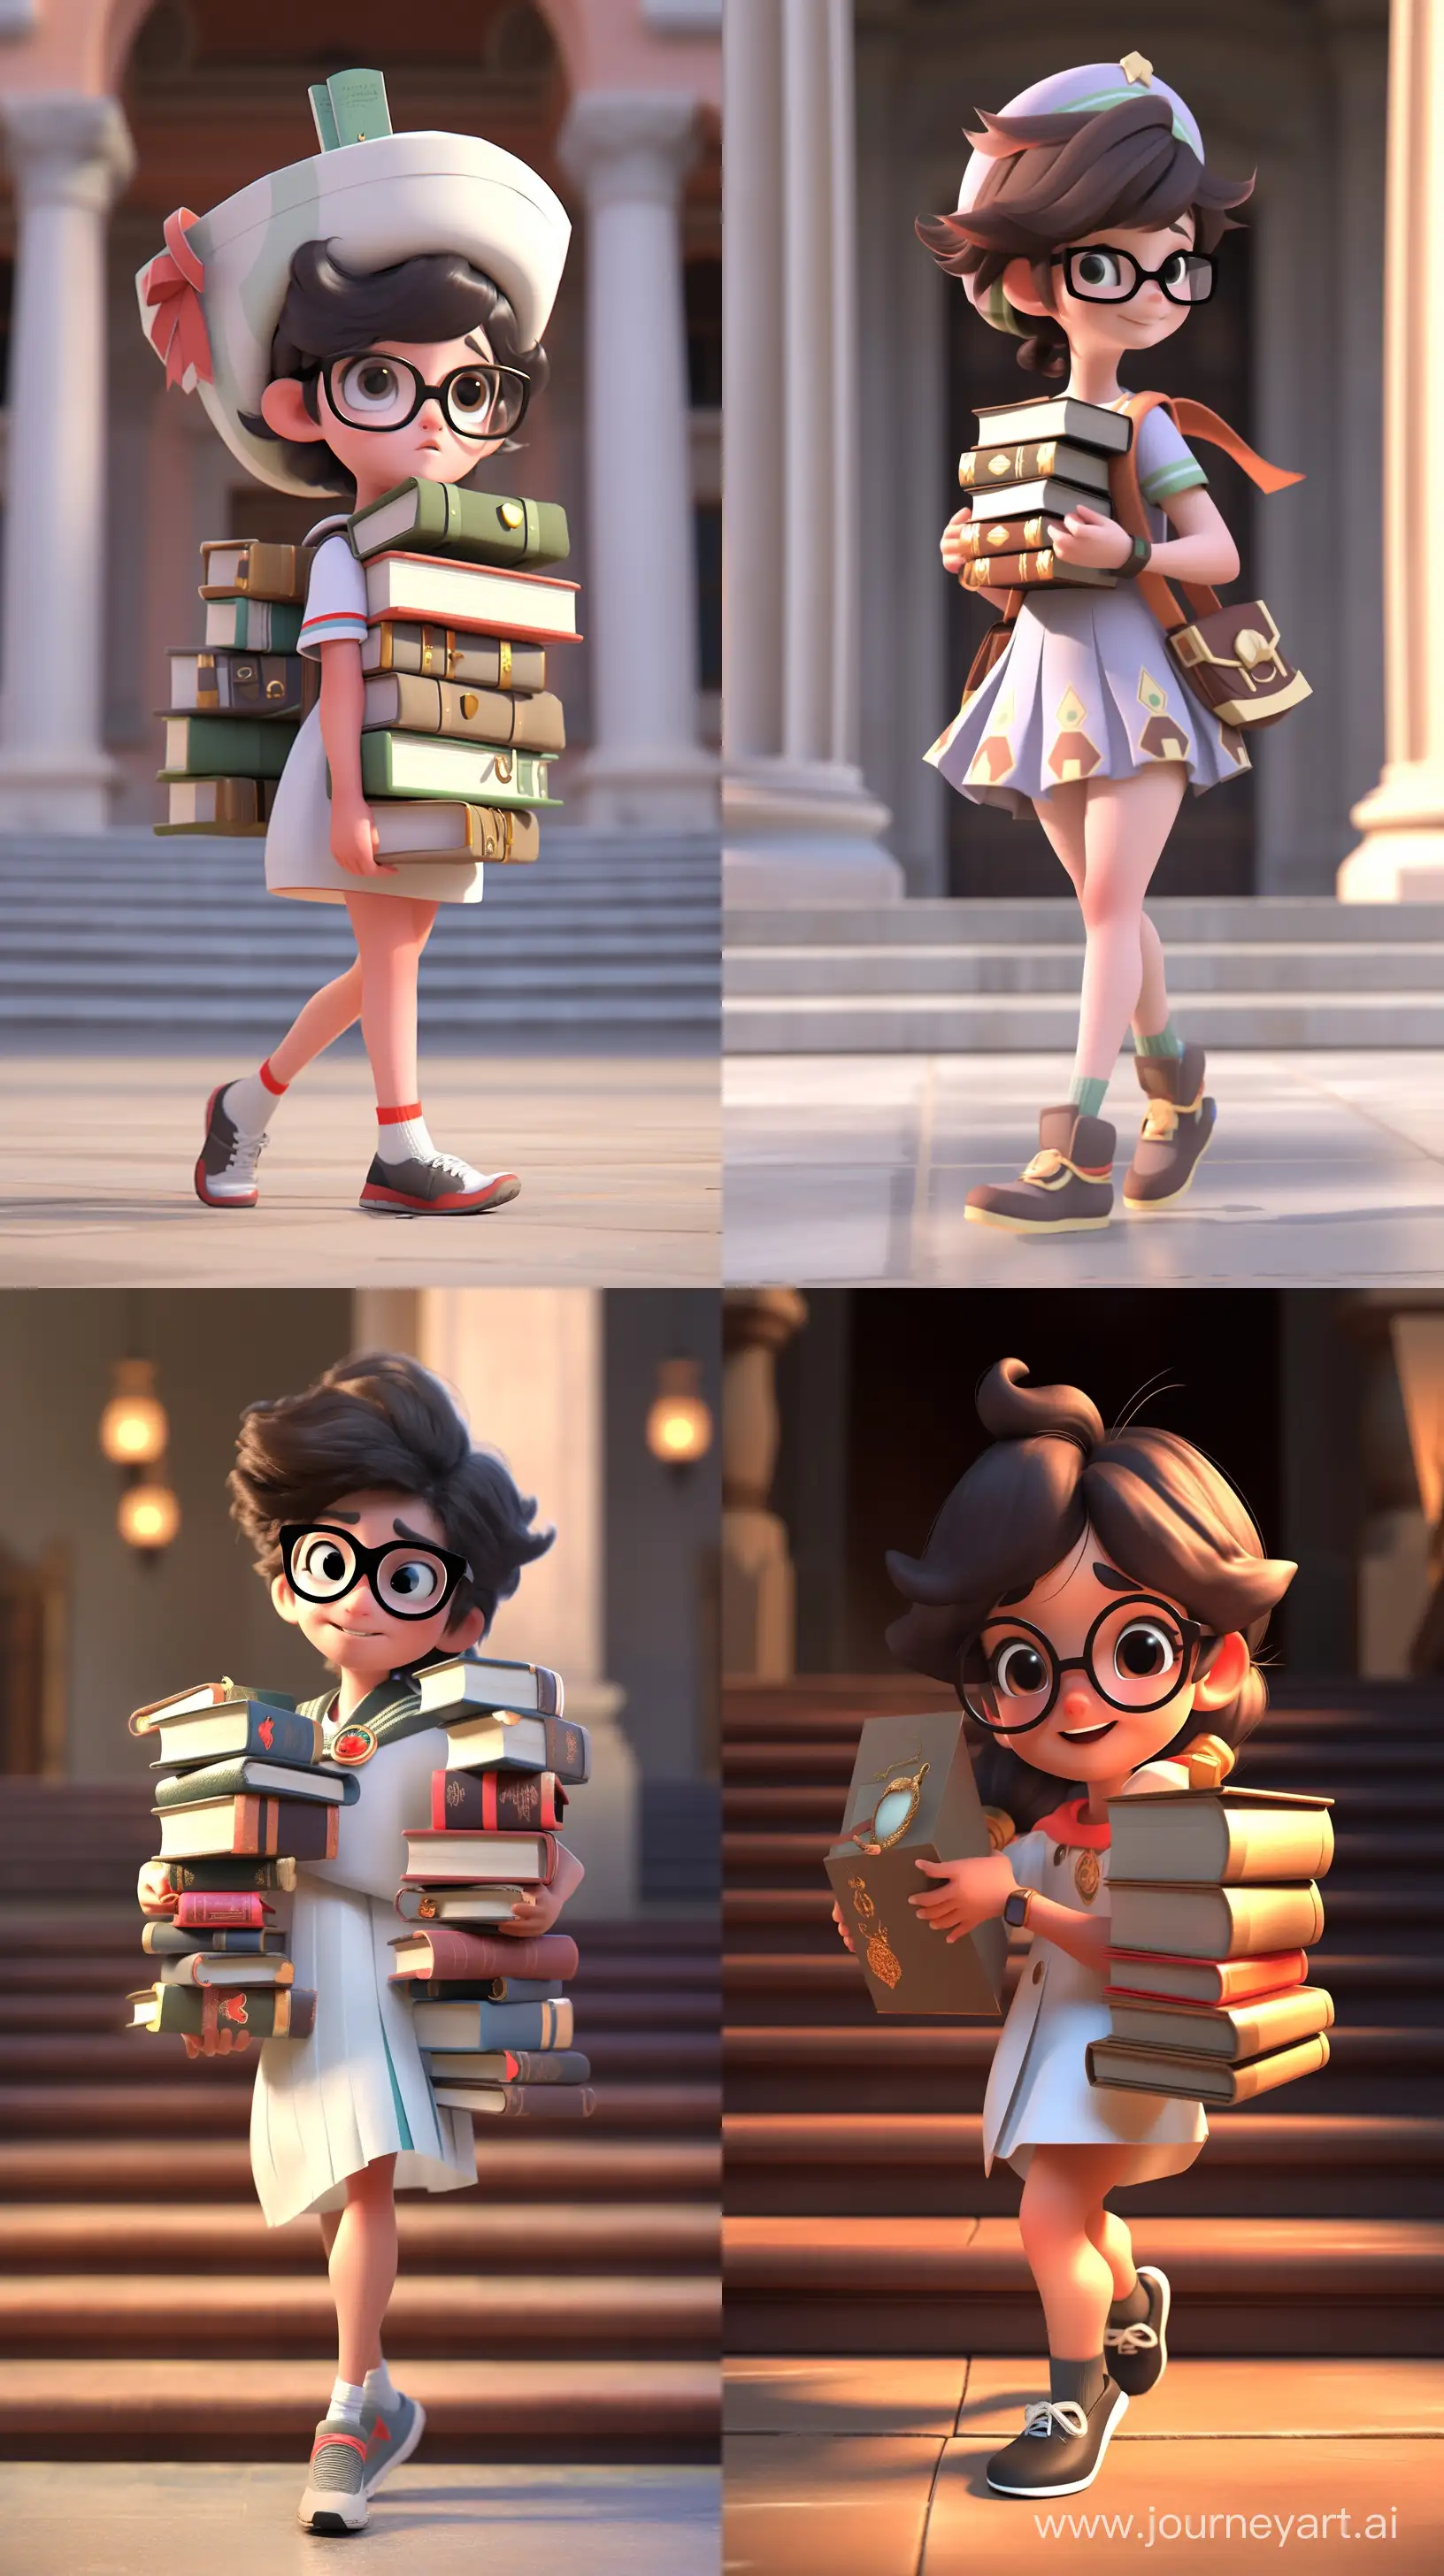 Athena-Scholarly-Student-with-Books-in-3D-Animation-Pixar-Style